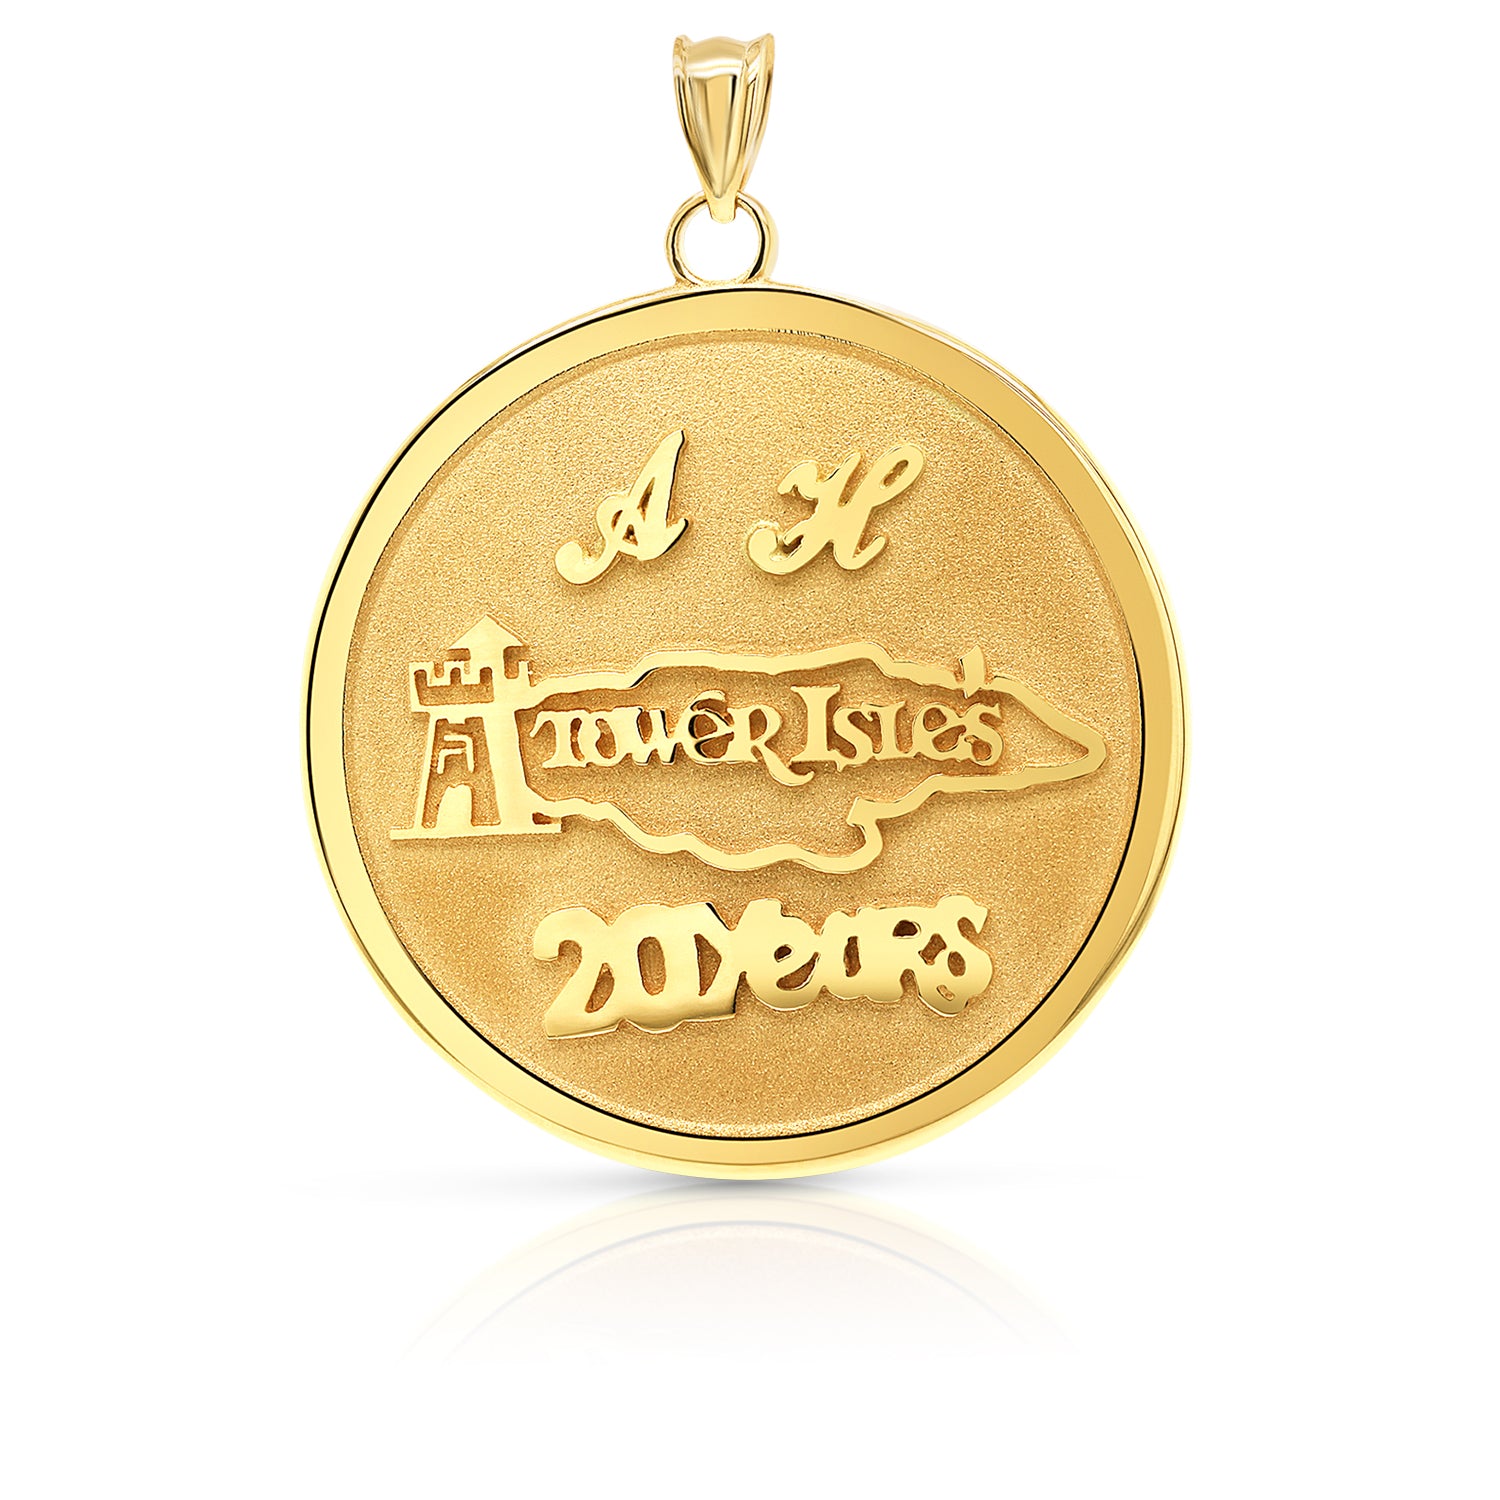 Gold round pendant with an engraved name on a white background